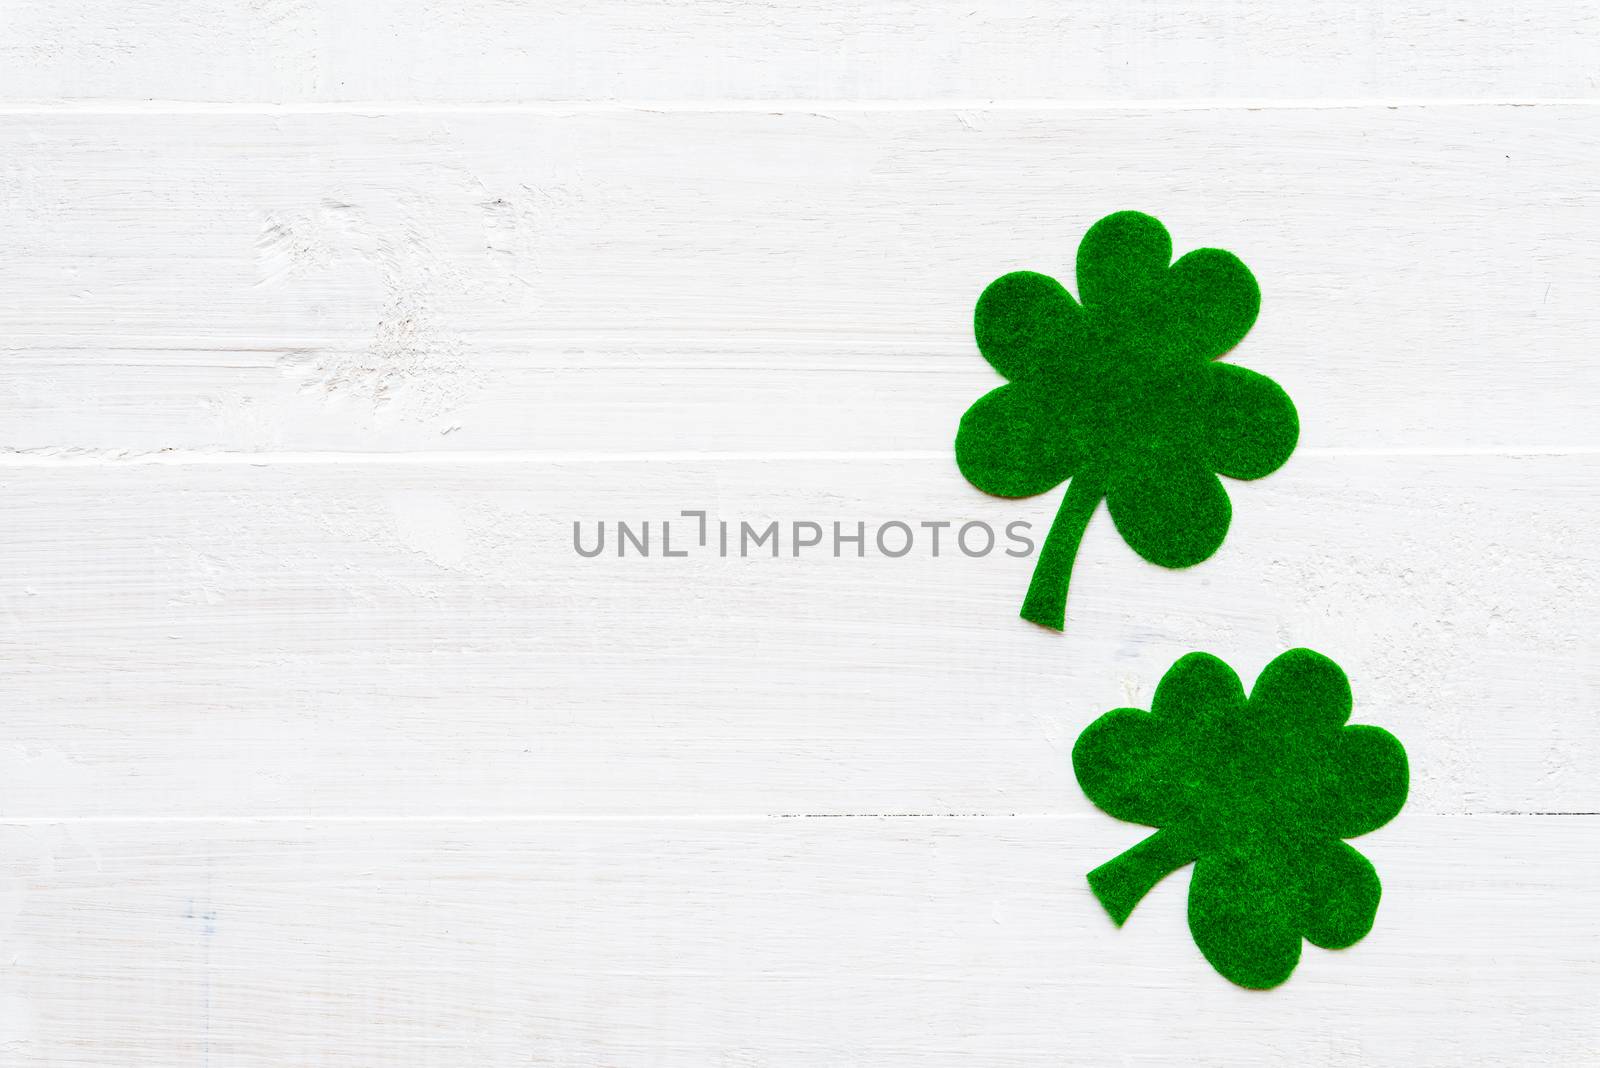 Happy St Patricks Day message on green paper clover and white wooden background